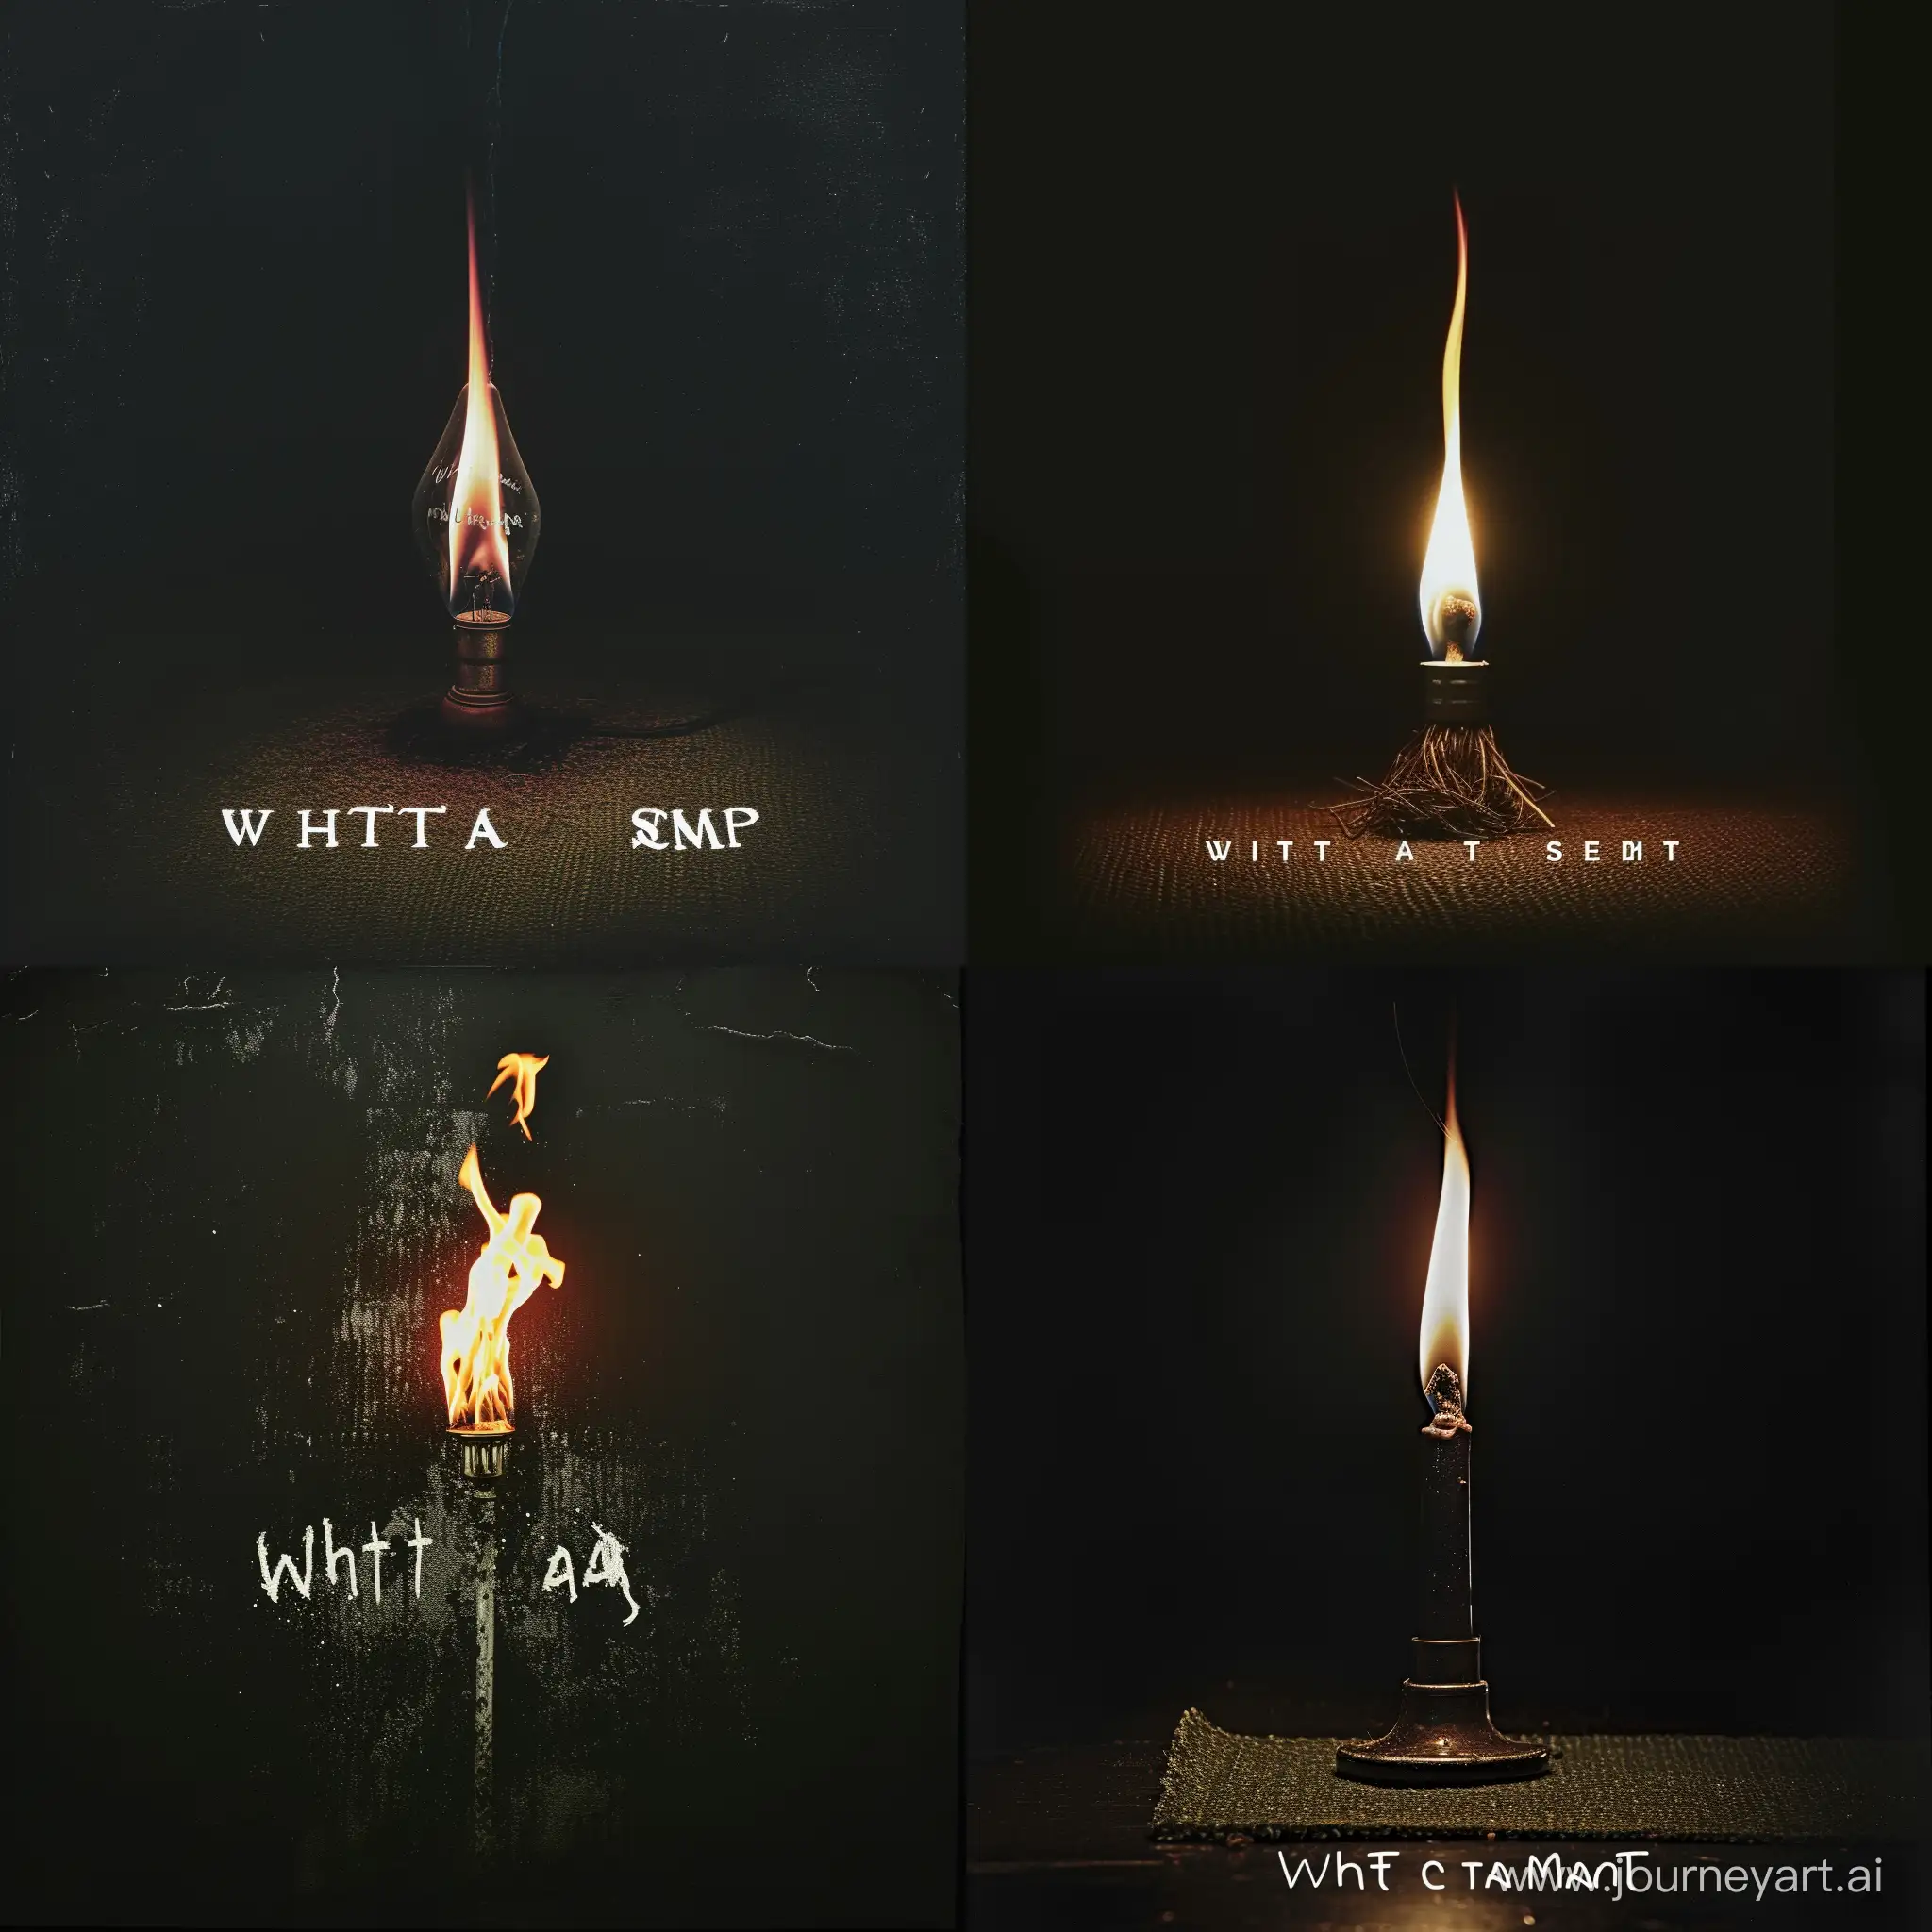 a burning lamp with a dark background is depicted, which illuminates the white inscription "without a mat"